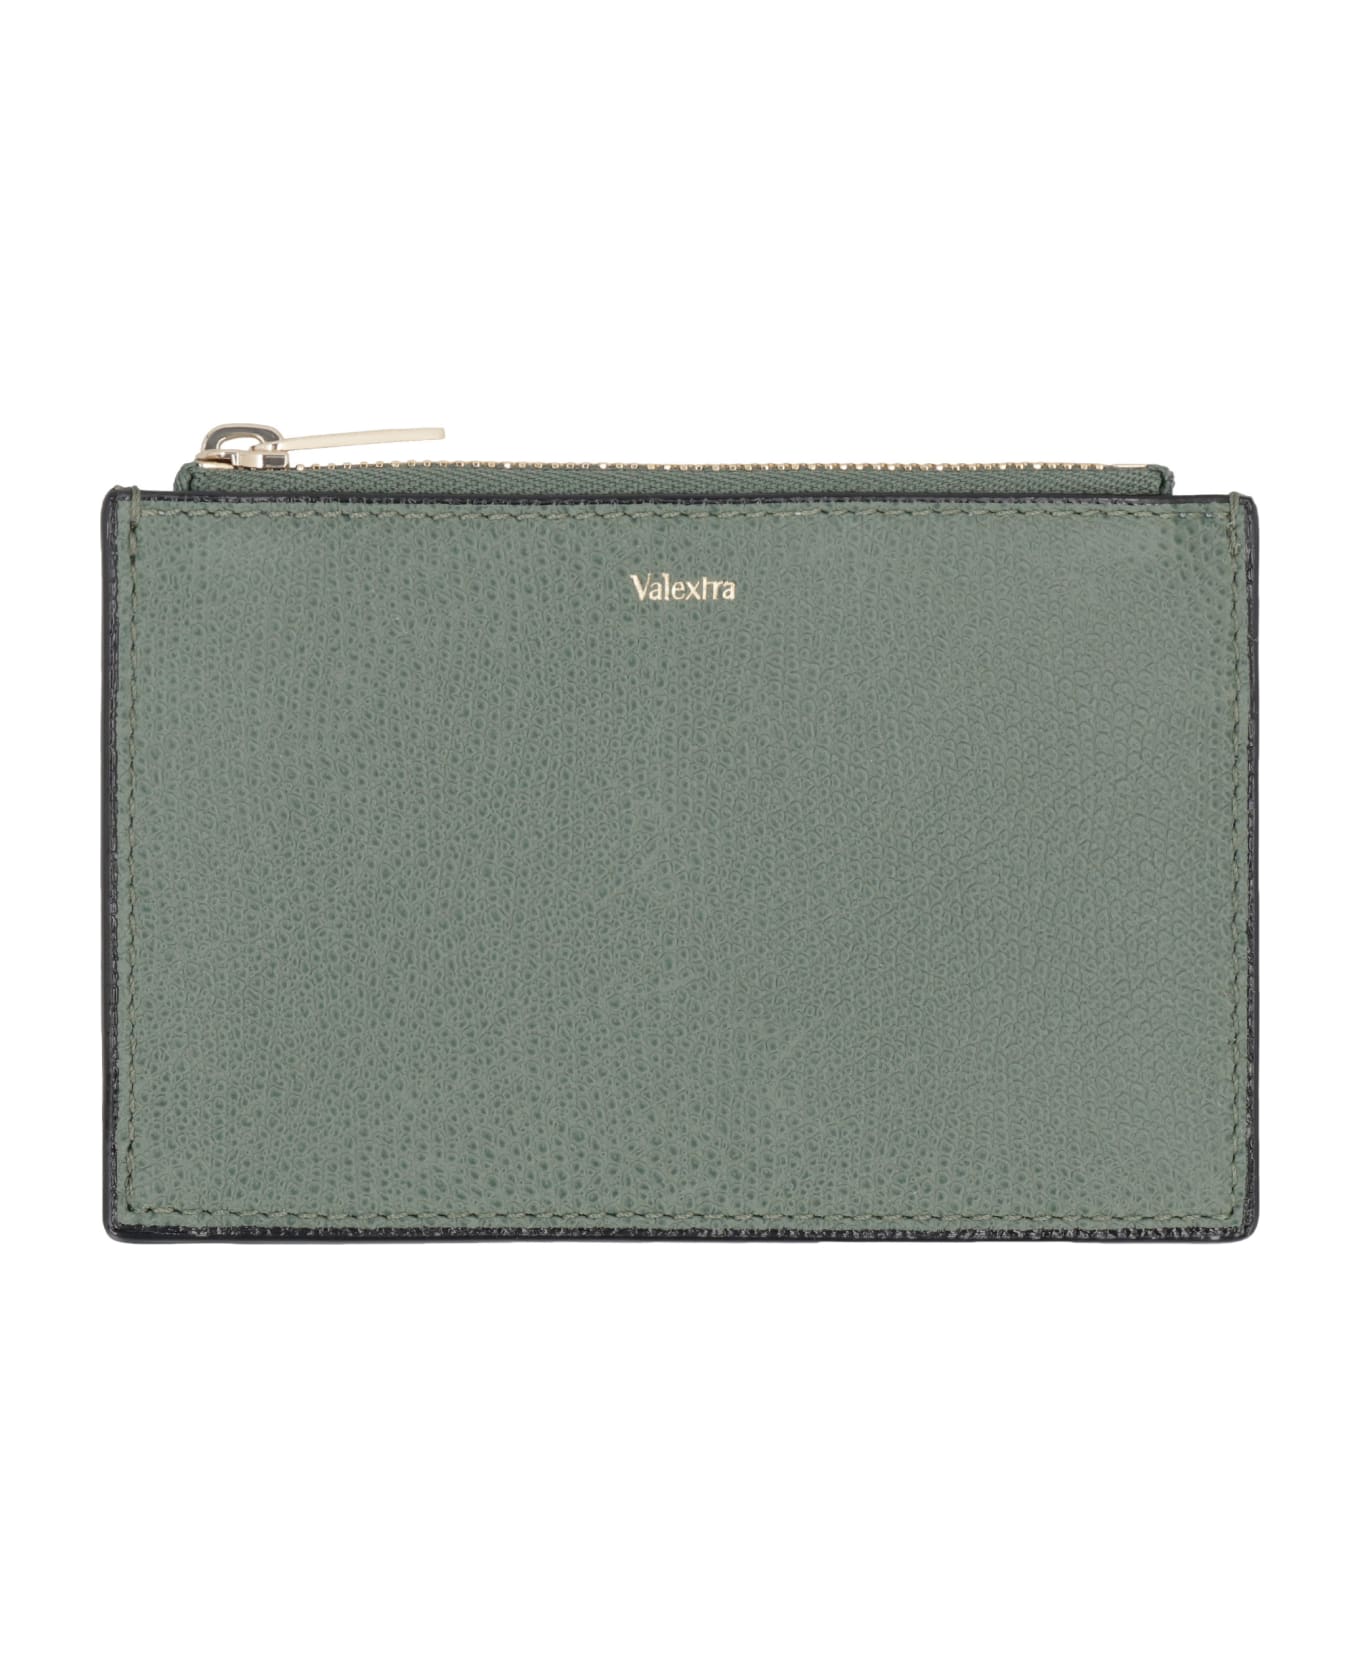 Valextra Leather Card Holder - green 財布